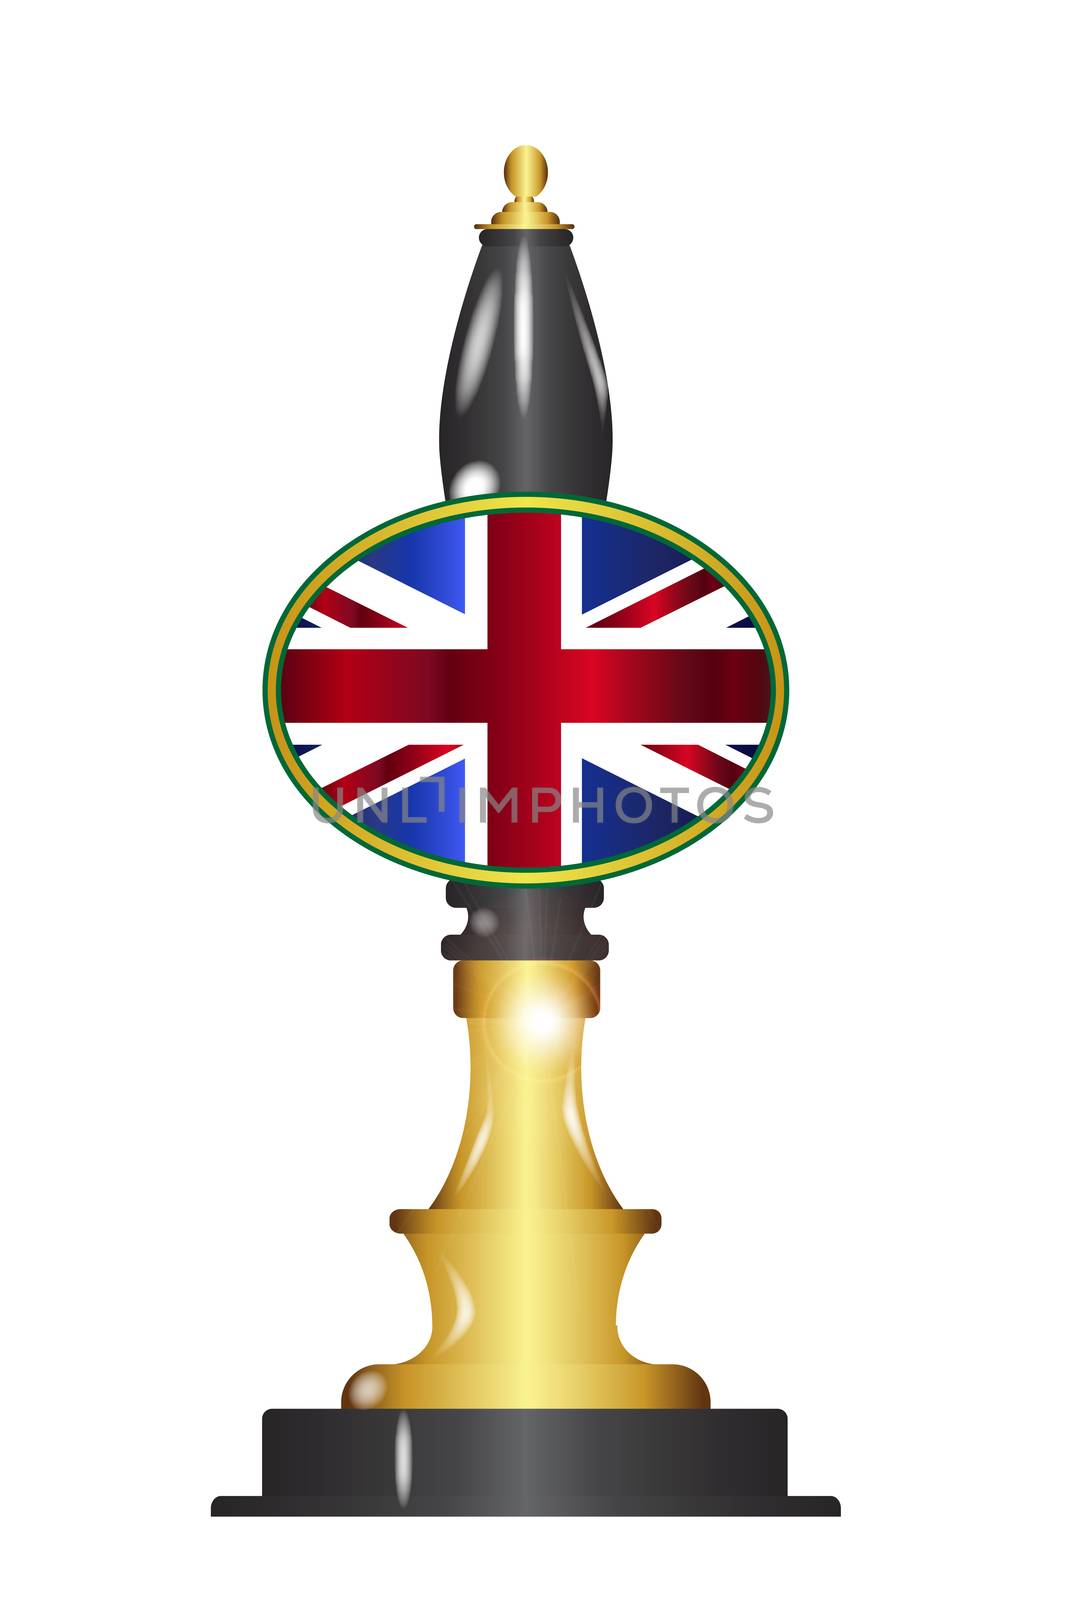 A traditional and typical beer pump with Union Jack flag over a white background